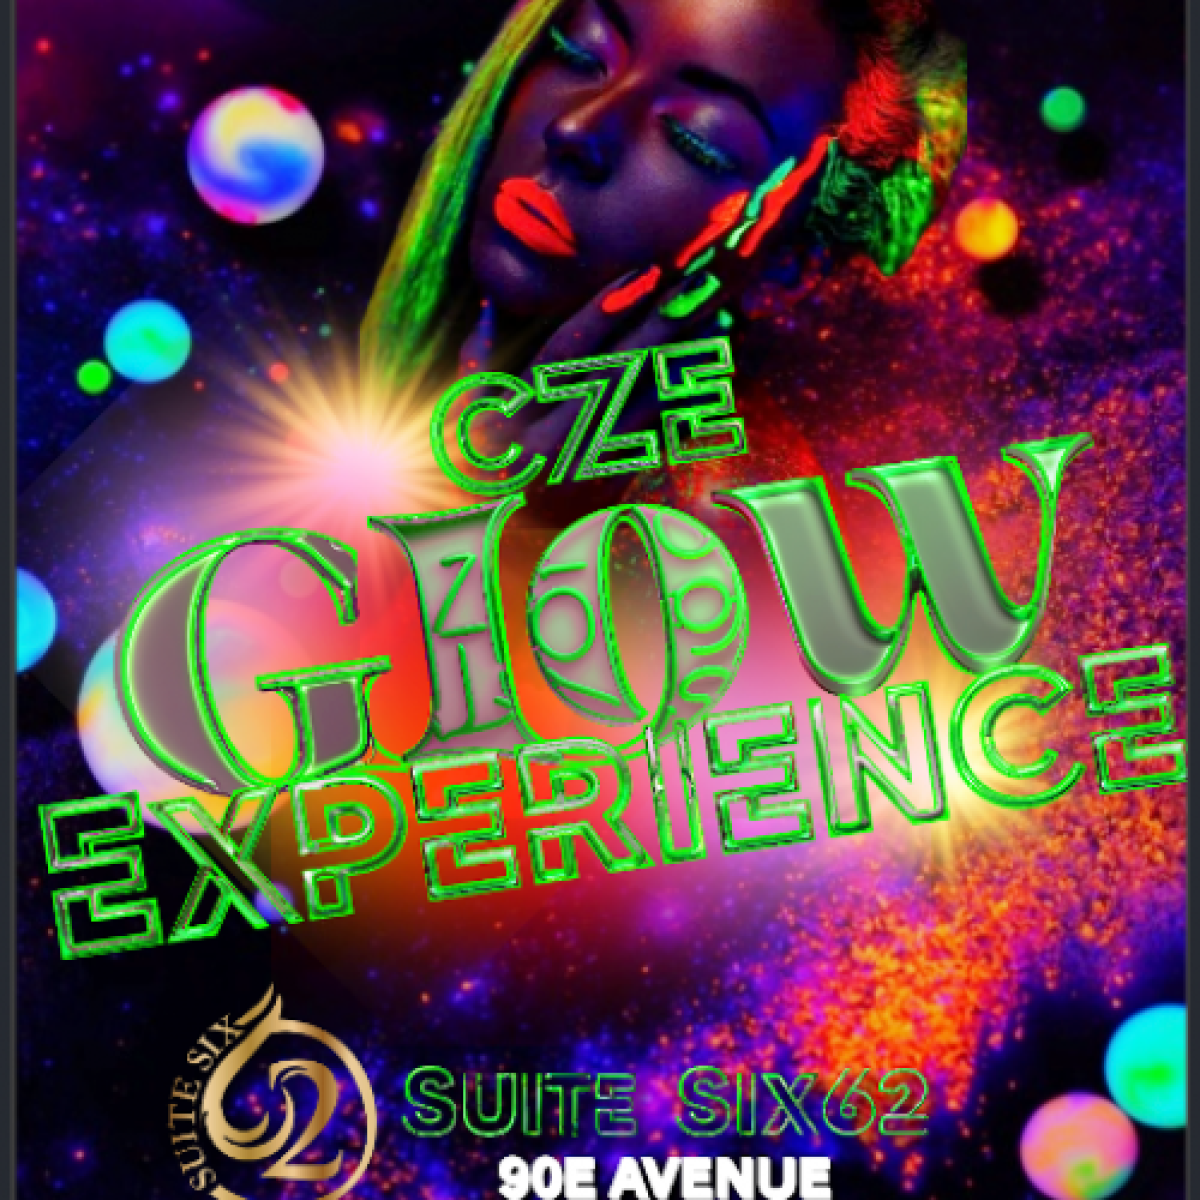 Cze's Glow Experience flyer or graphic.